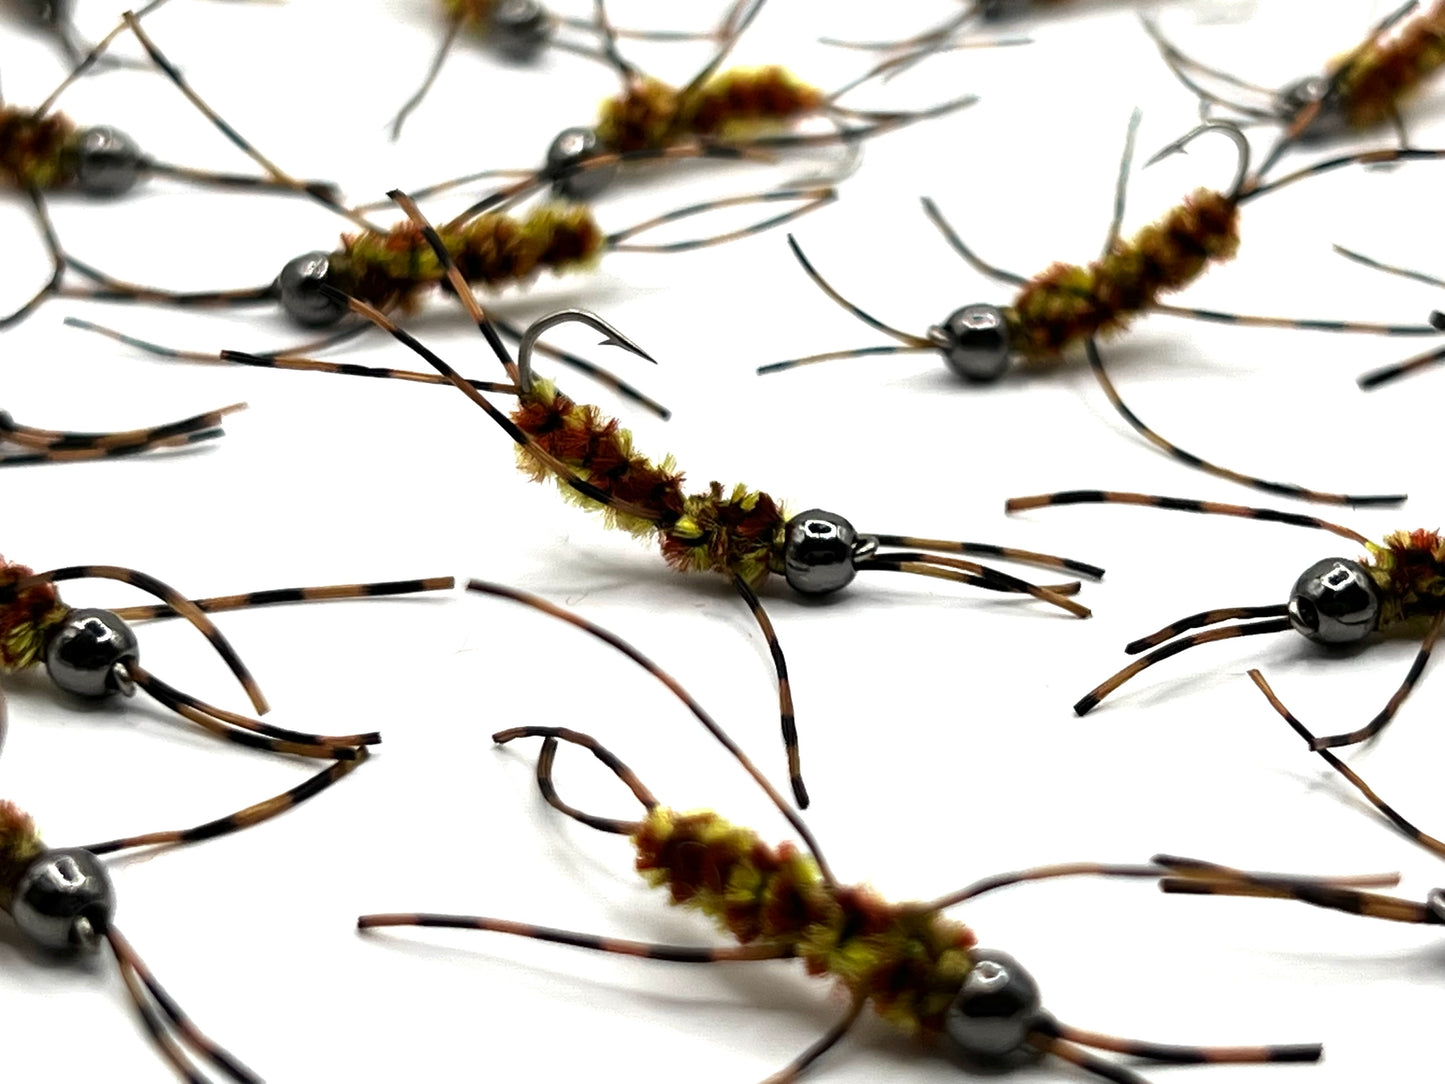 Size 12 Brown Olive Pat’s Stoneflies